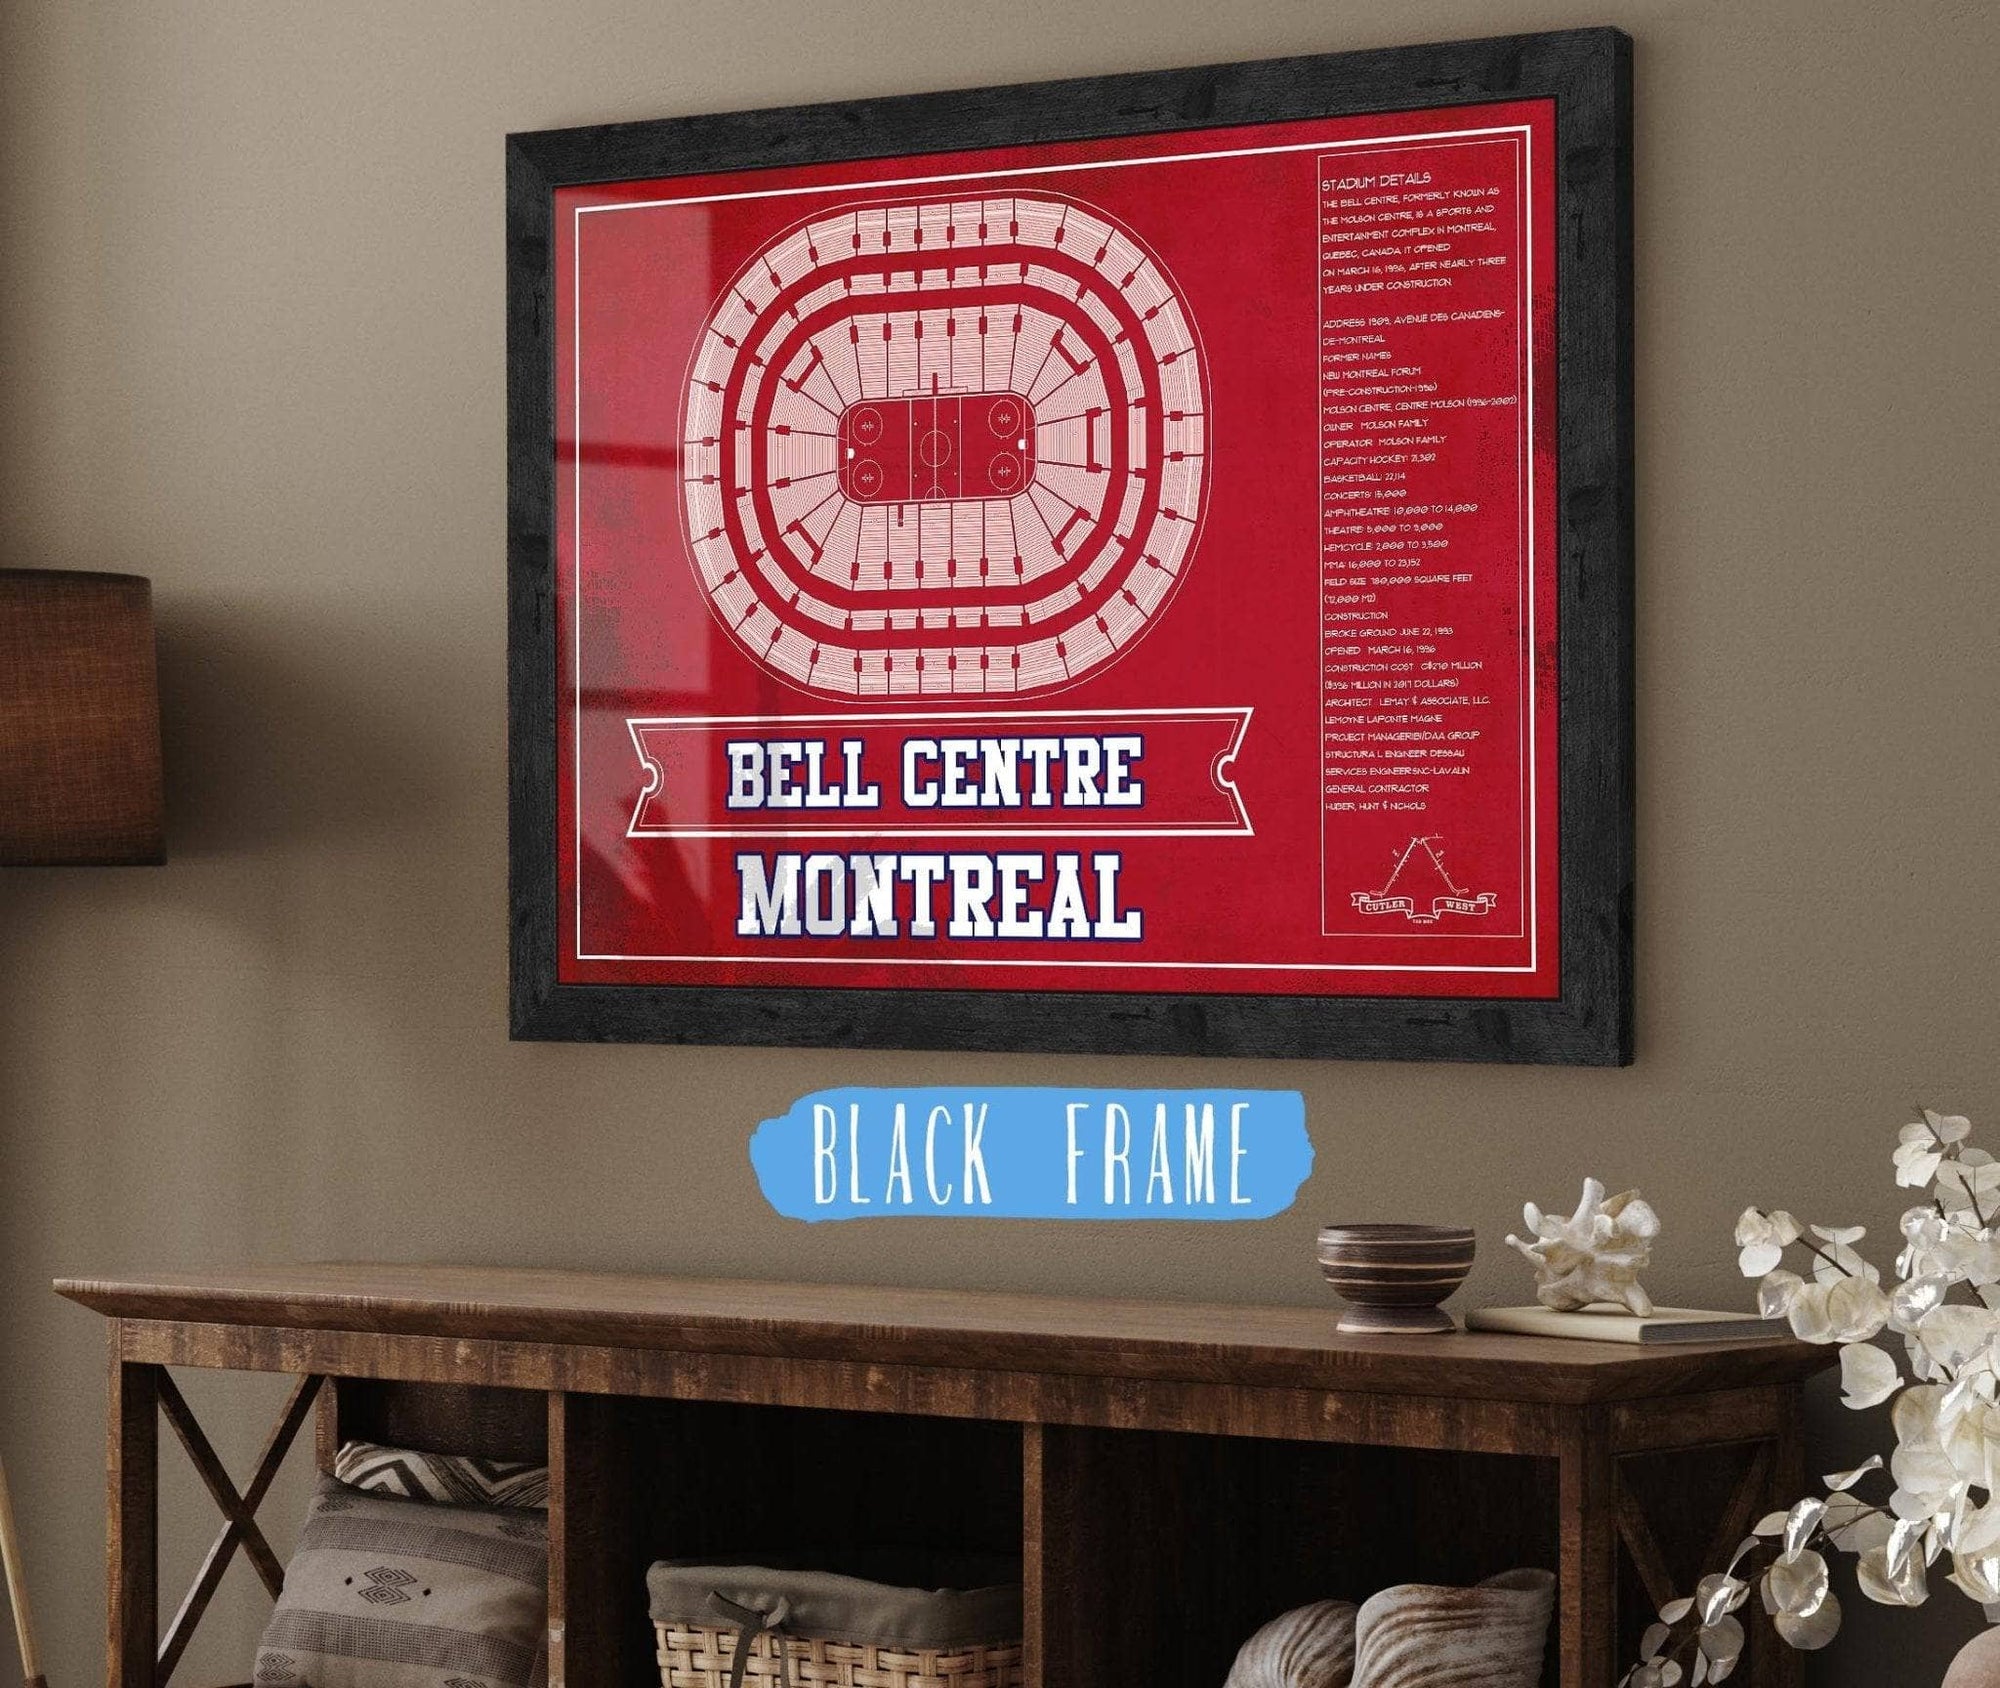 Cutler West 14" x 11" / Black Frame Montreal Canadiens Bell Centre Seating Chart - Vintage Hockey Team Color Print 673822723-TEAM-14"-x-11"80062